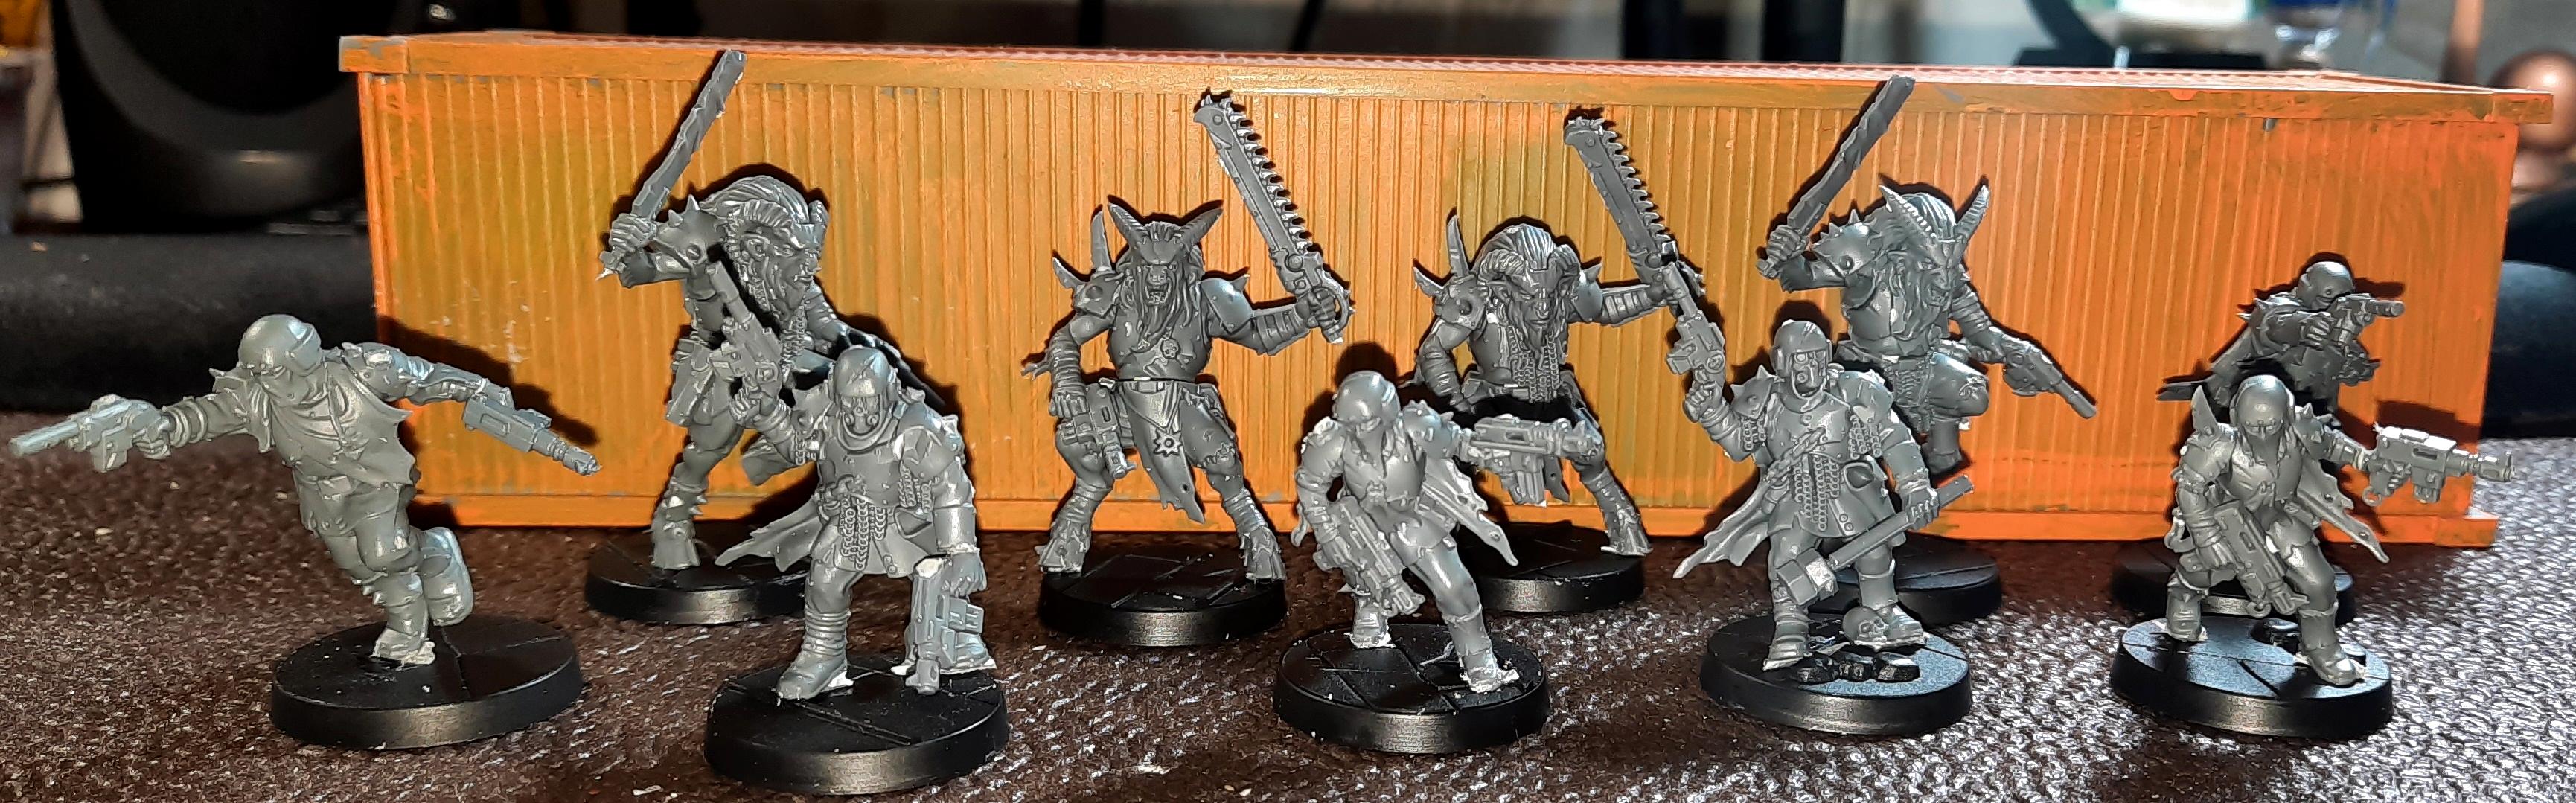 Cultists, Genestealer Cult, Imperial Guard, Neophite, Servants Of The Abyss, Traitor